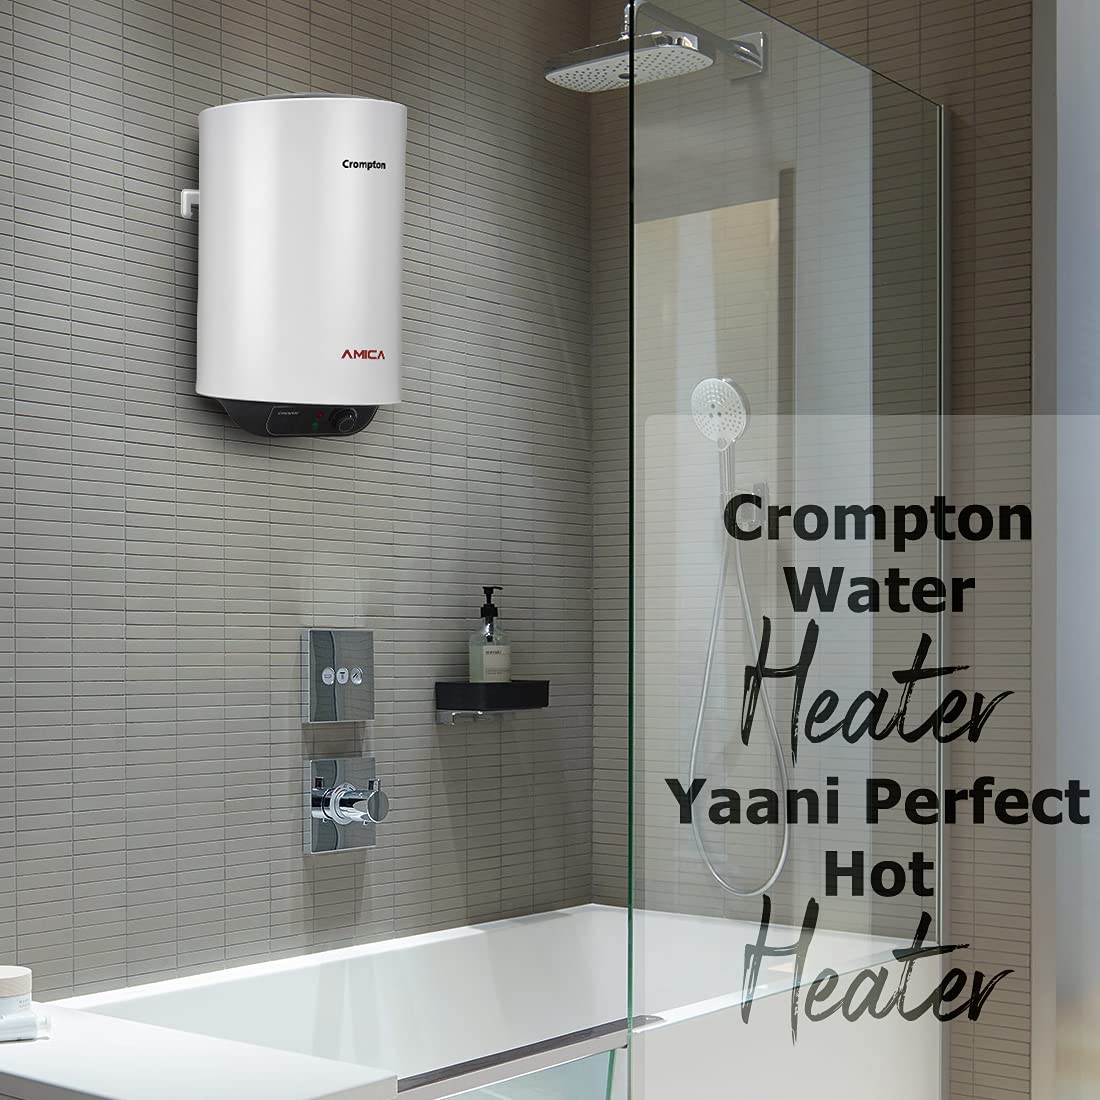 Crompton Amica Plus 25-L 5 Star Rated Storage Water Heater (Geyser) with Free Installation and Connection Pipes (Black & White) - Mahajan Electronics Online